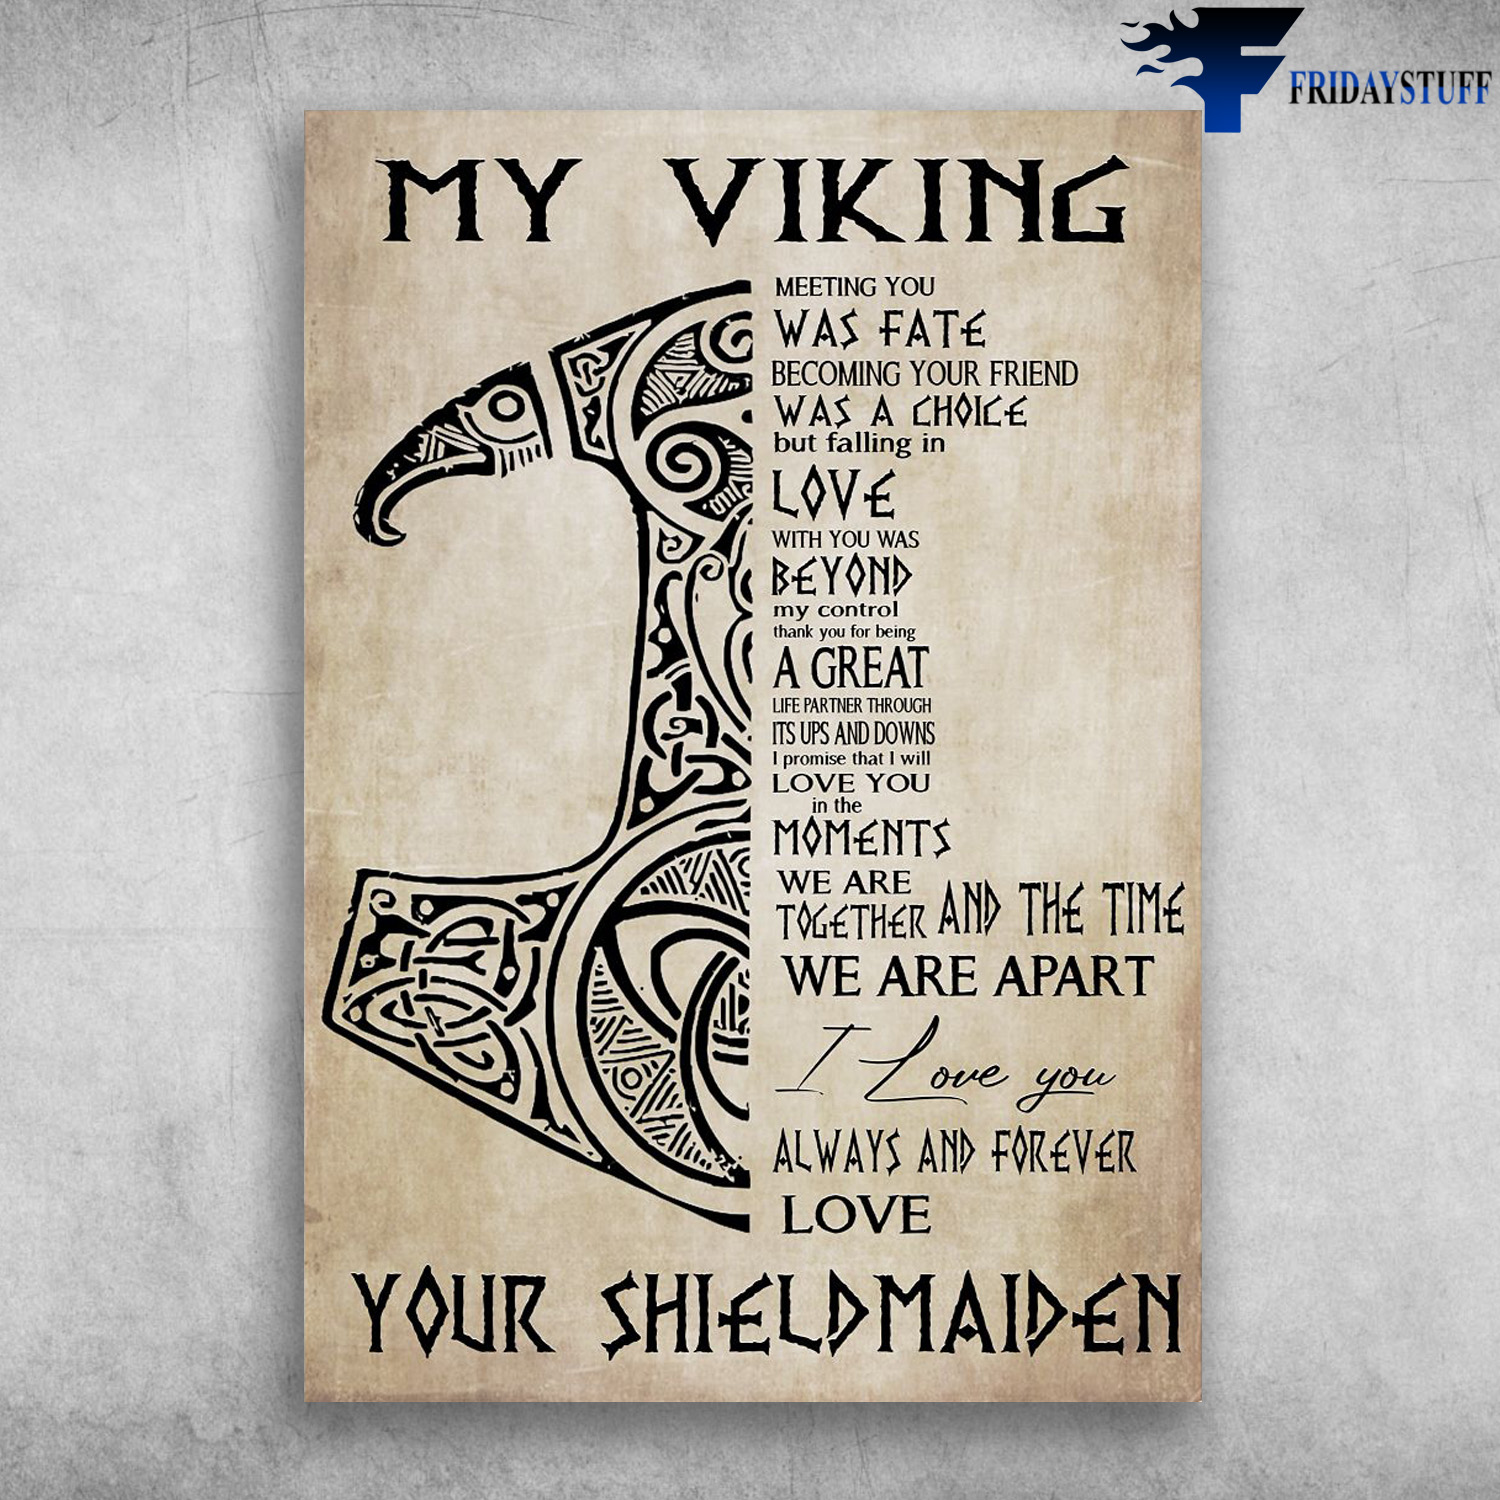 My Viking - Meeting You Was Fate, Becomeing Your Friend Was A Choice, But Falling In Live With You Was Beyond My Control, Thank You Being A Great Life Partner Through Its Ups And Downs I Promise That I Will Love You In The Moments